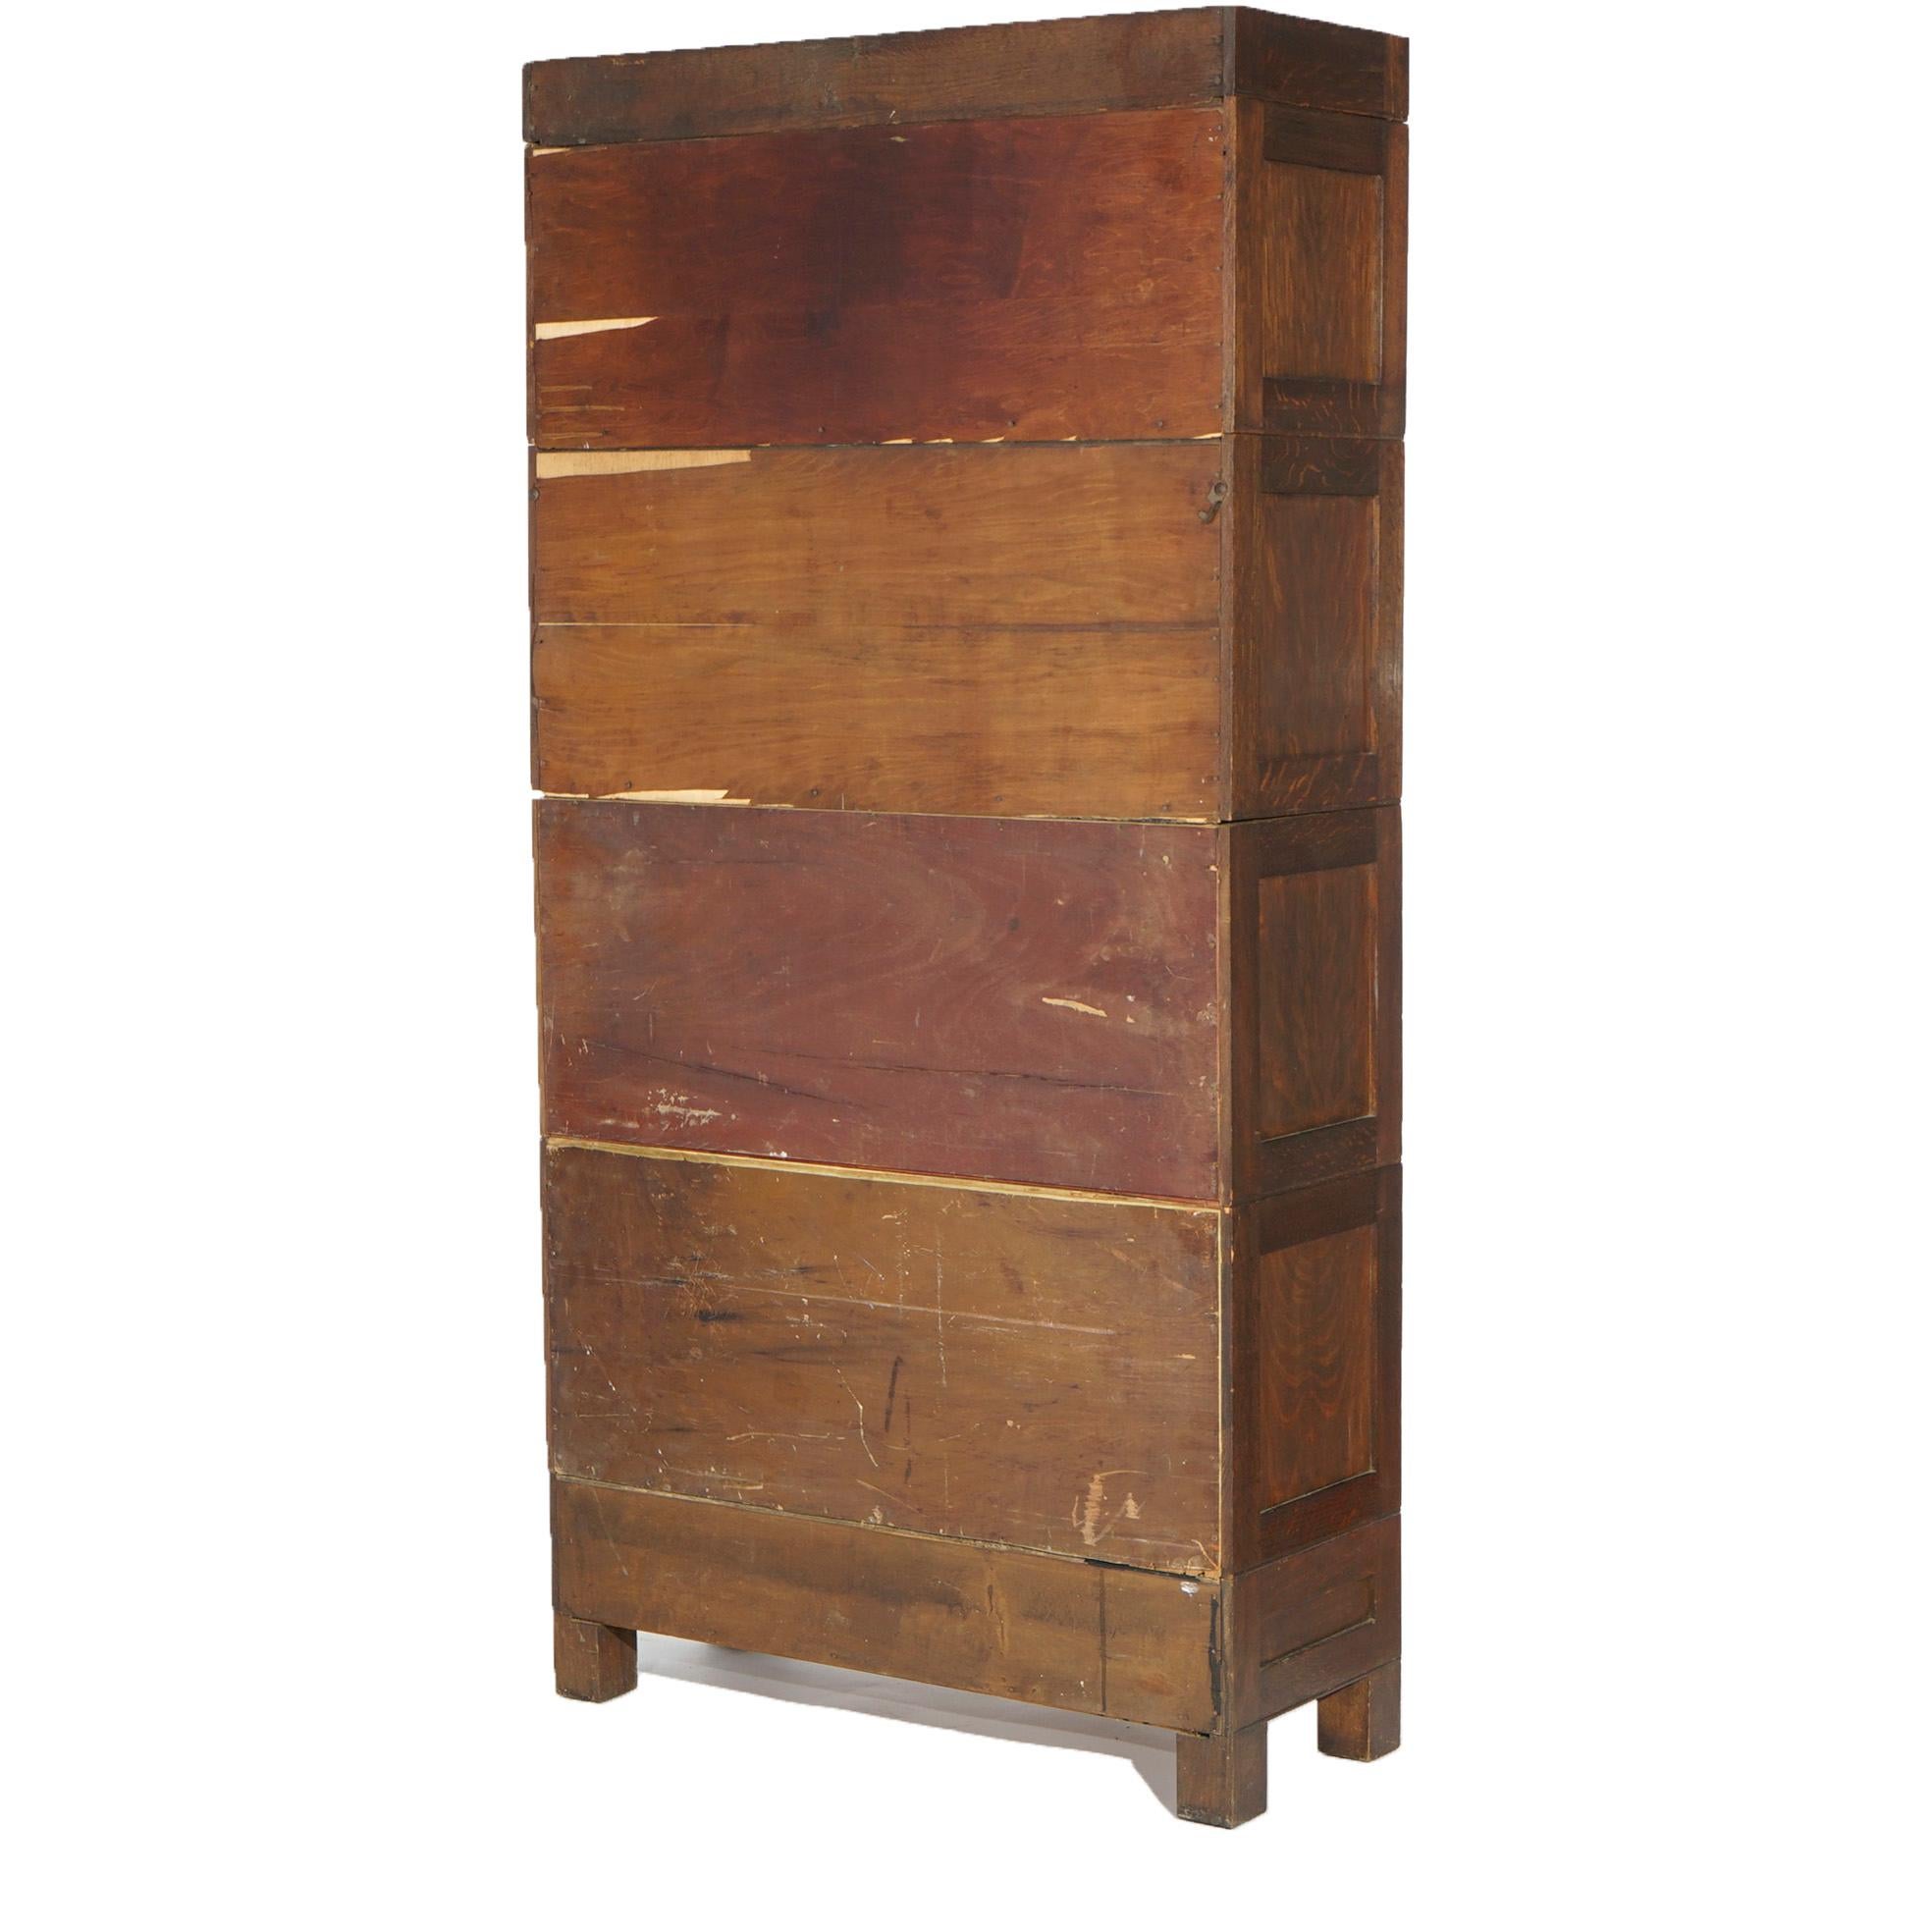 20th Century Antique Arts&Crafts Mission Oak&Leaded Glass Barrister Stack Bookcase circa 1910